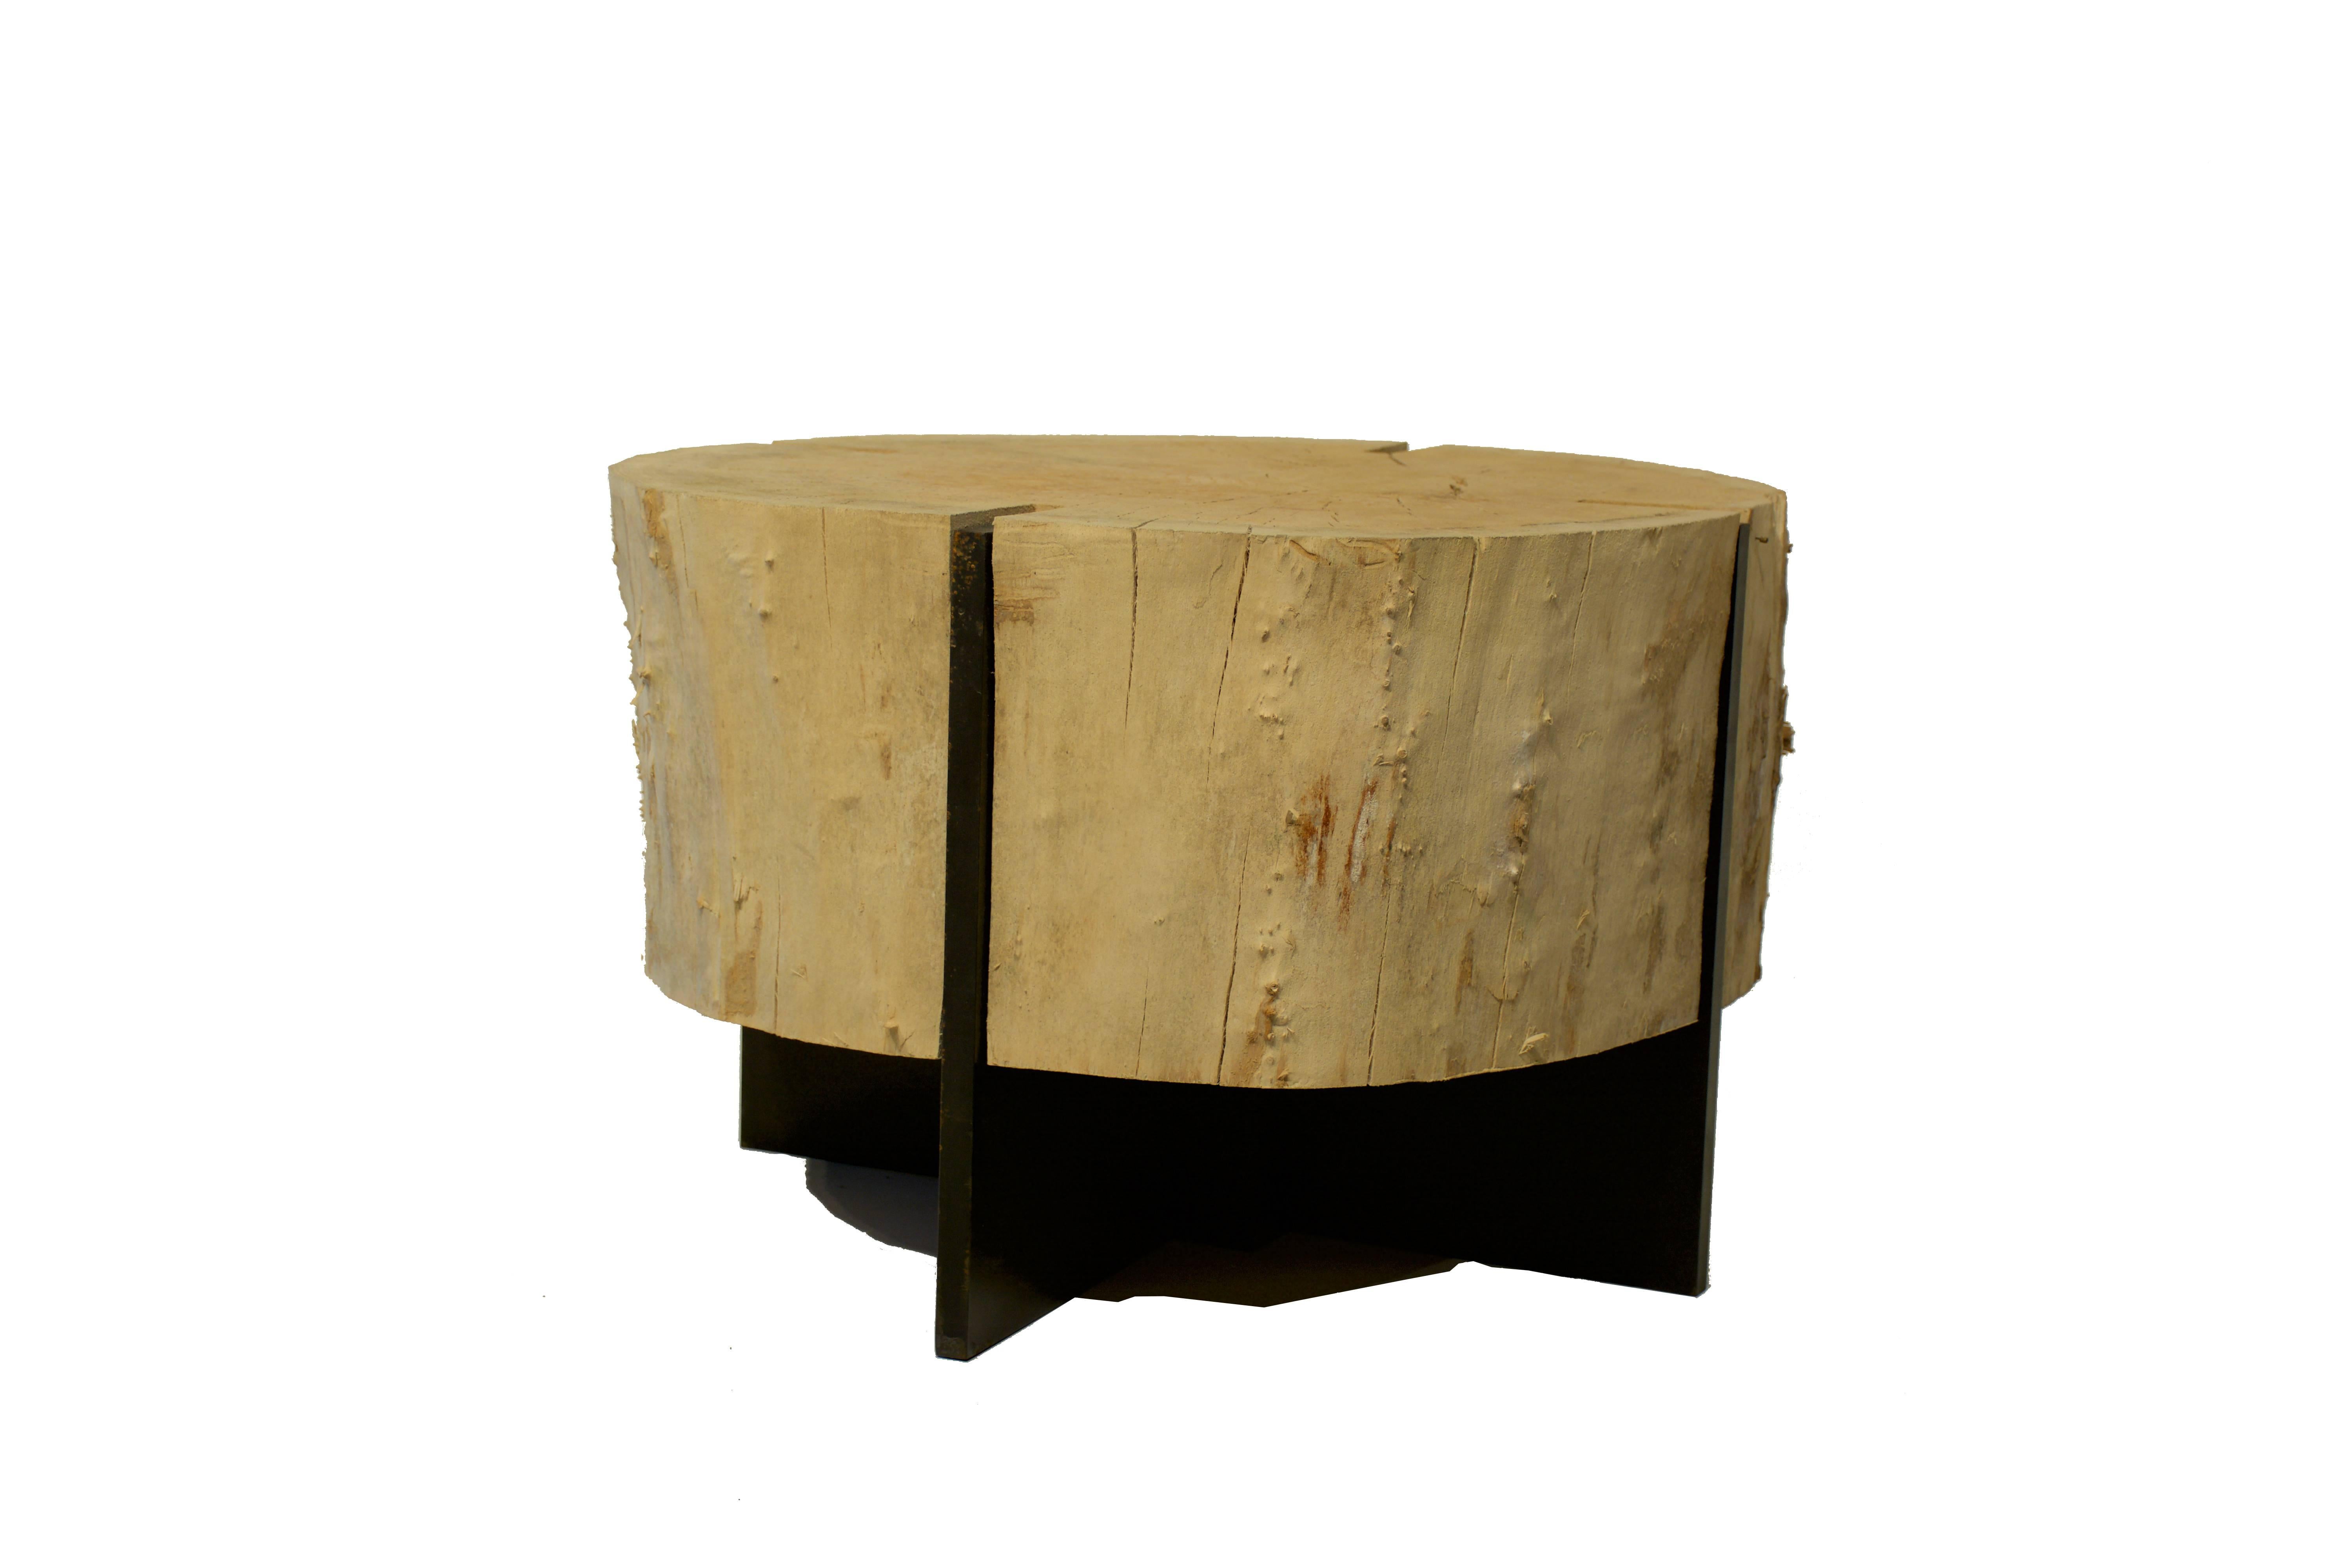 Contemporary Oak Coffee Table on Iron Mount